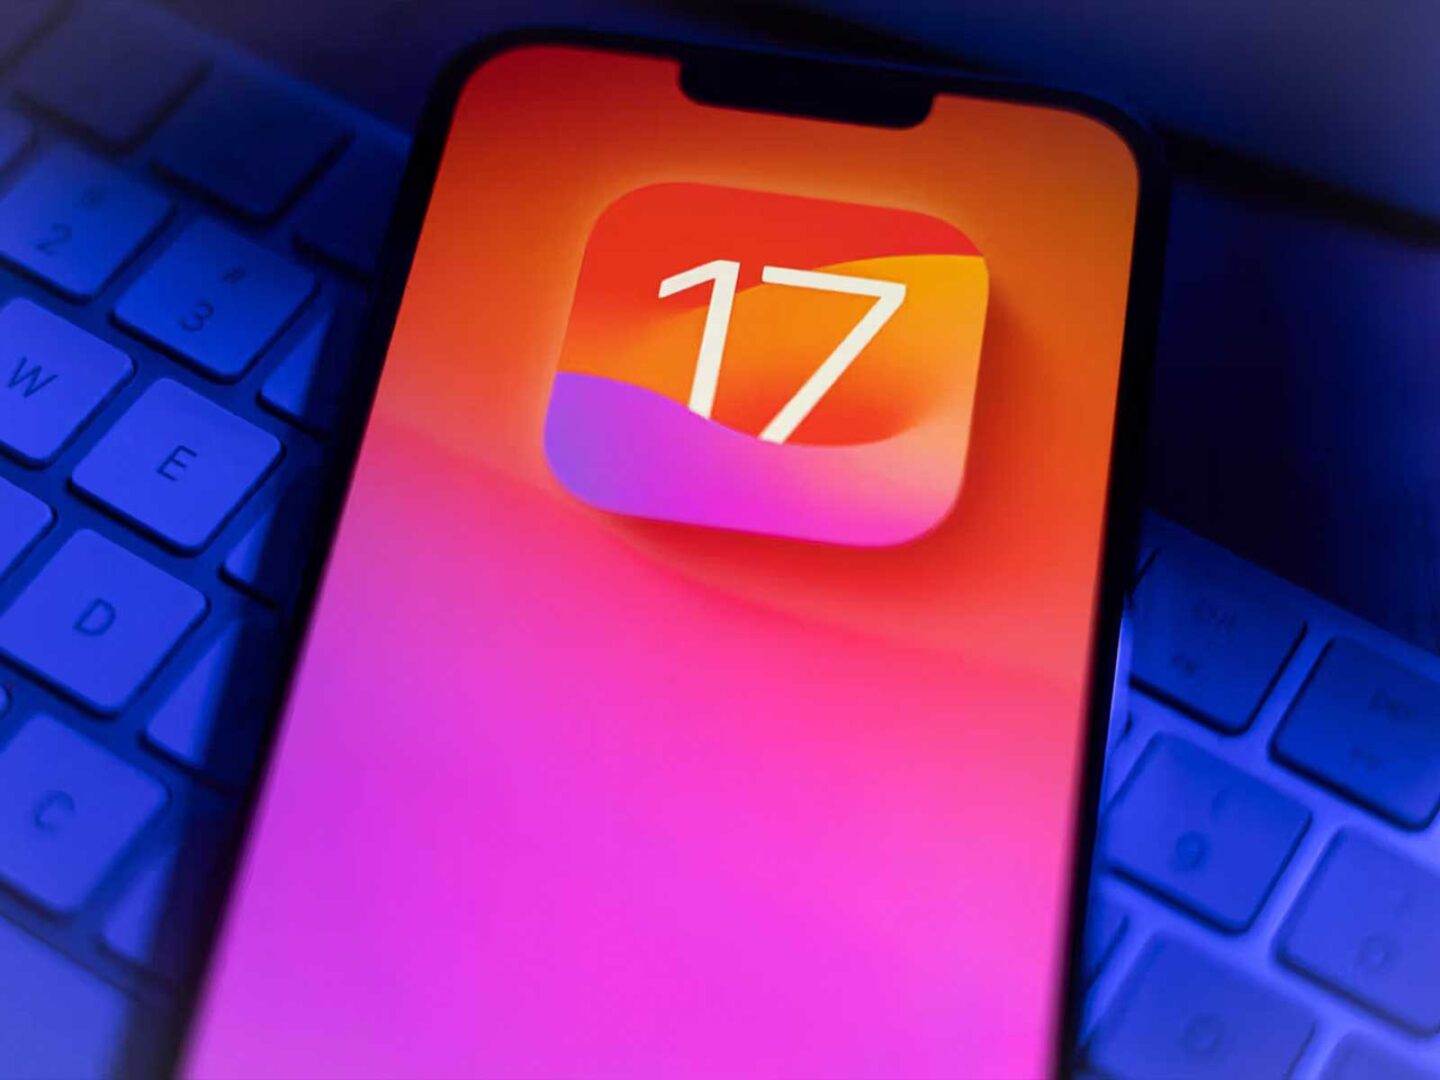 Apple rolls out iOS 17.4 update for iPhone